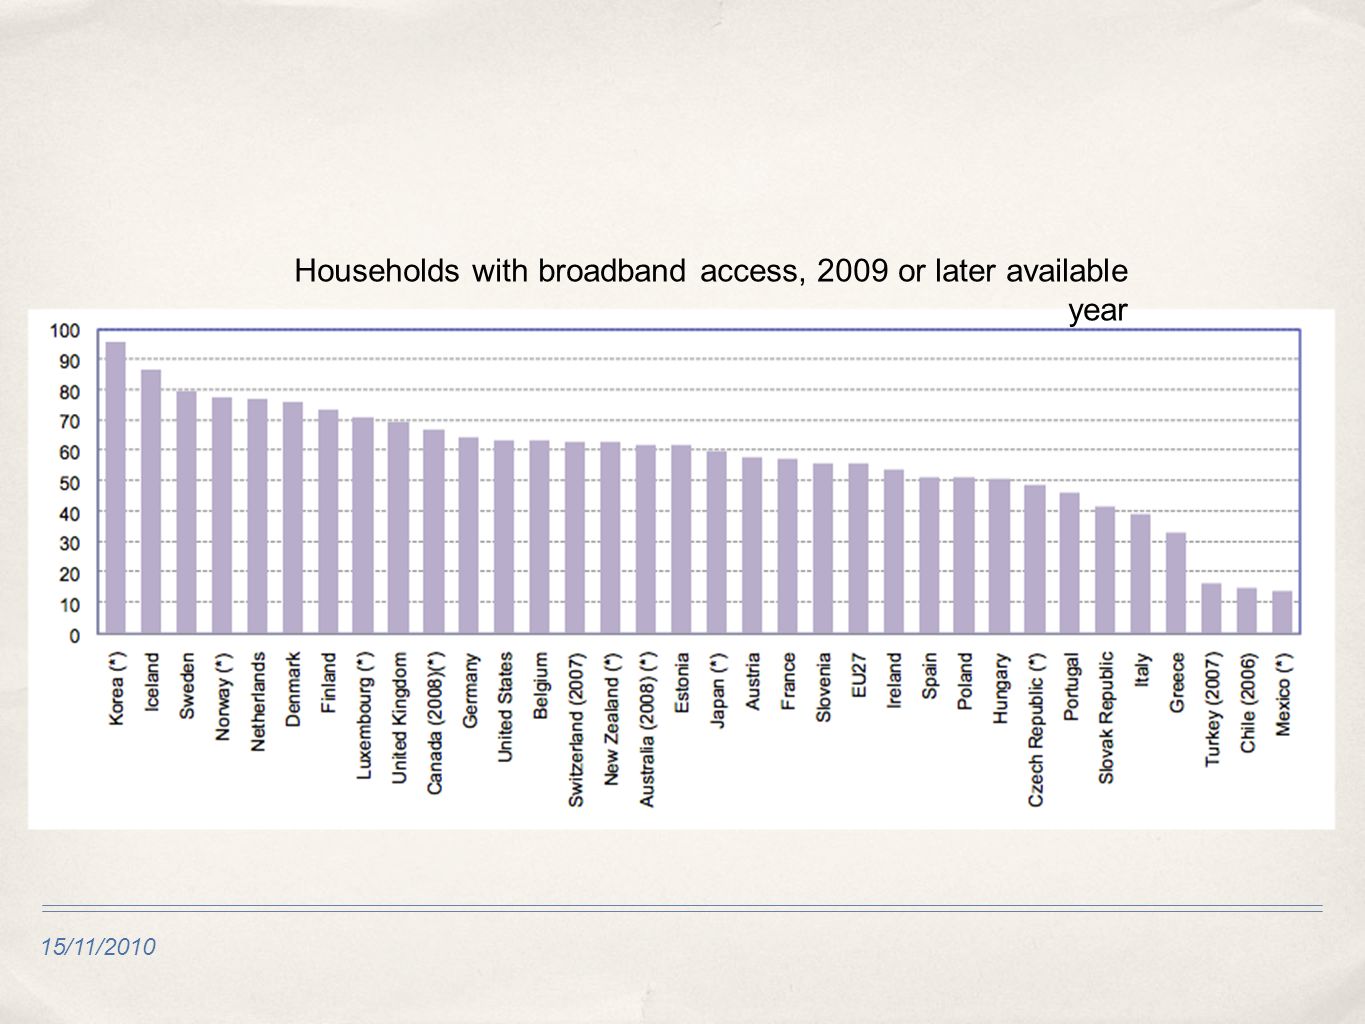 Households with broadband access, 2009 or later available year